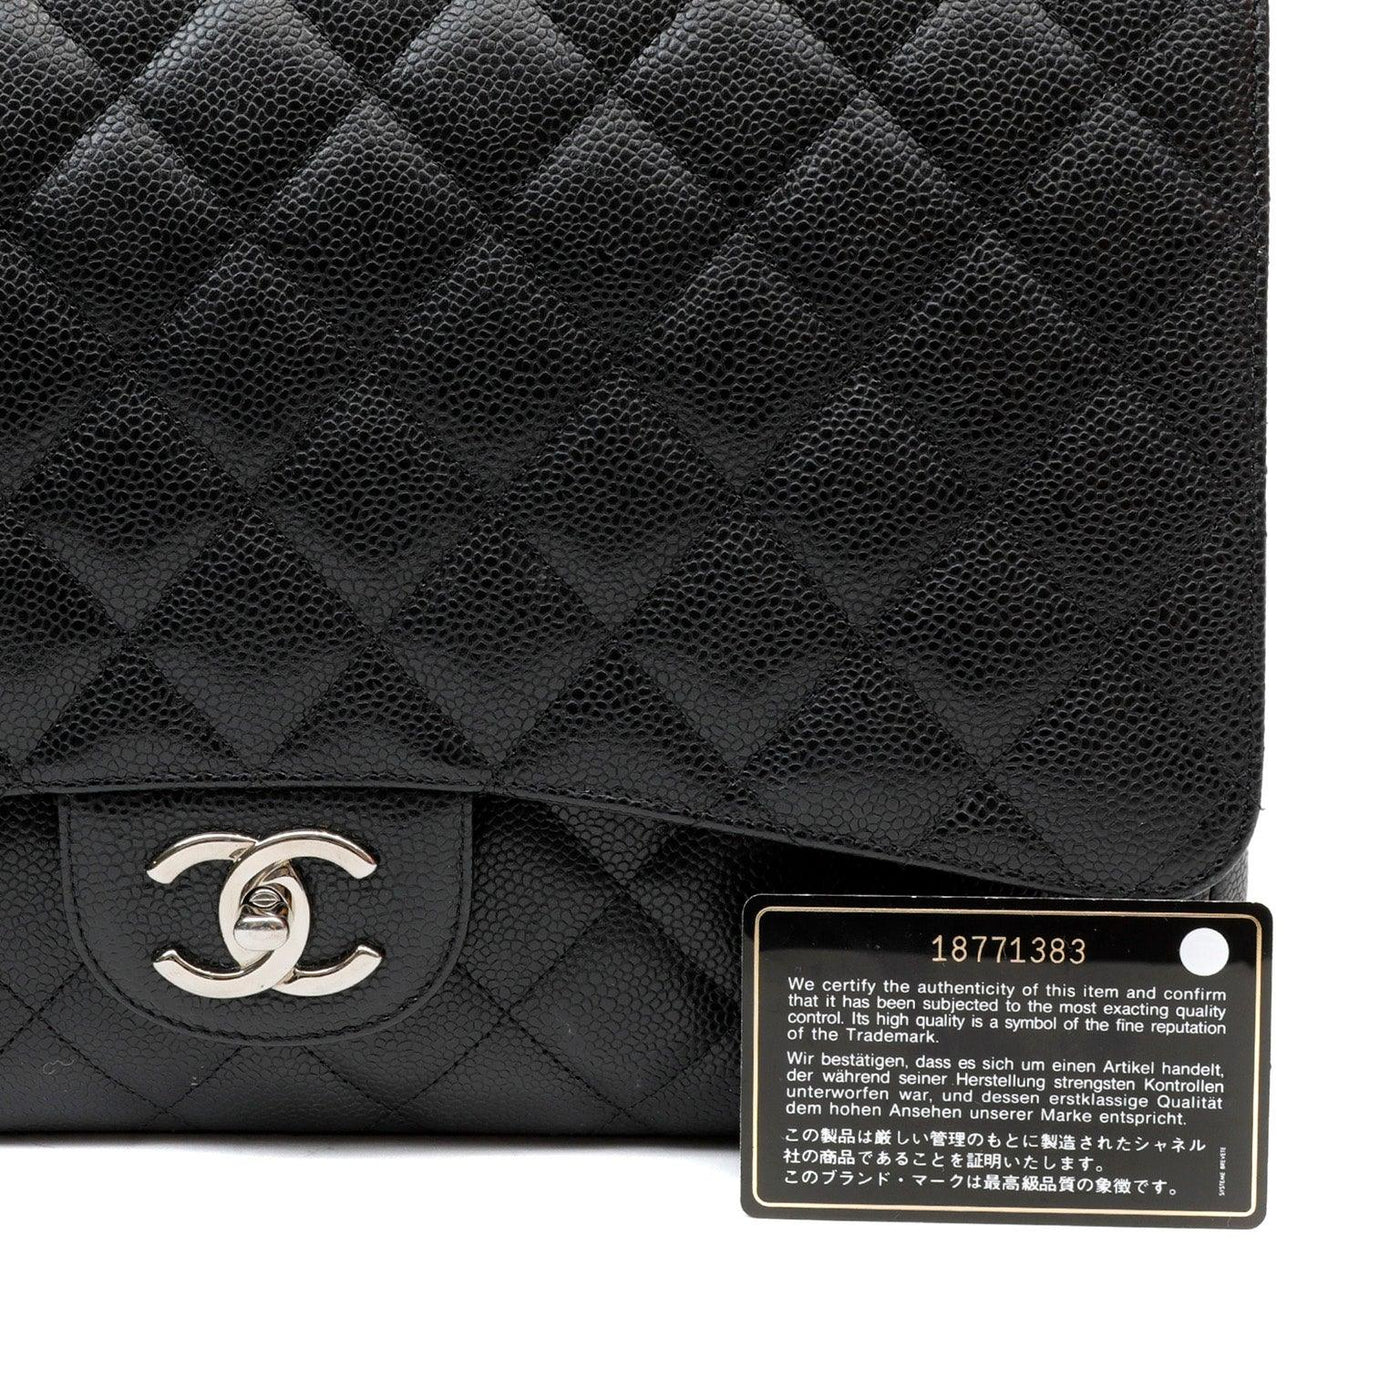 Chanel Black Caviar Double Flap Maxi w/ Gold Hardware - Only Authentics